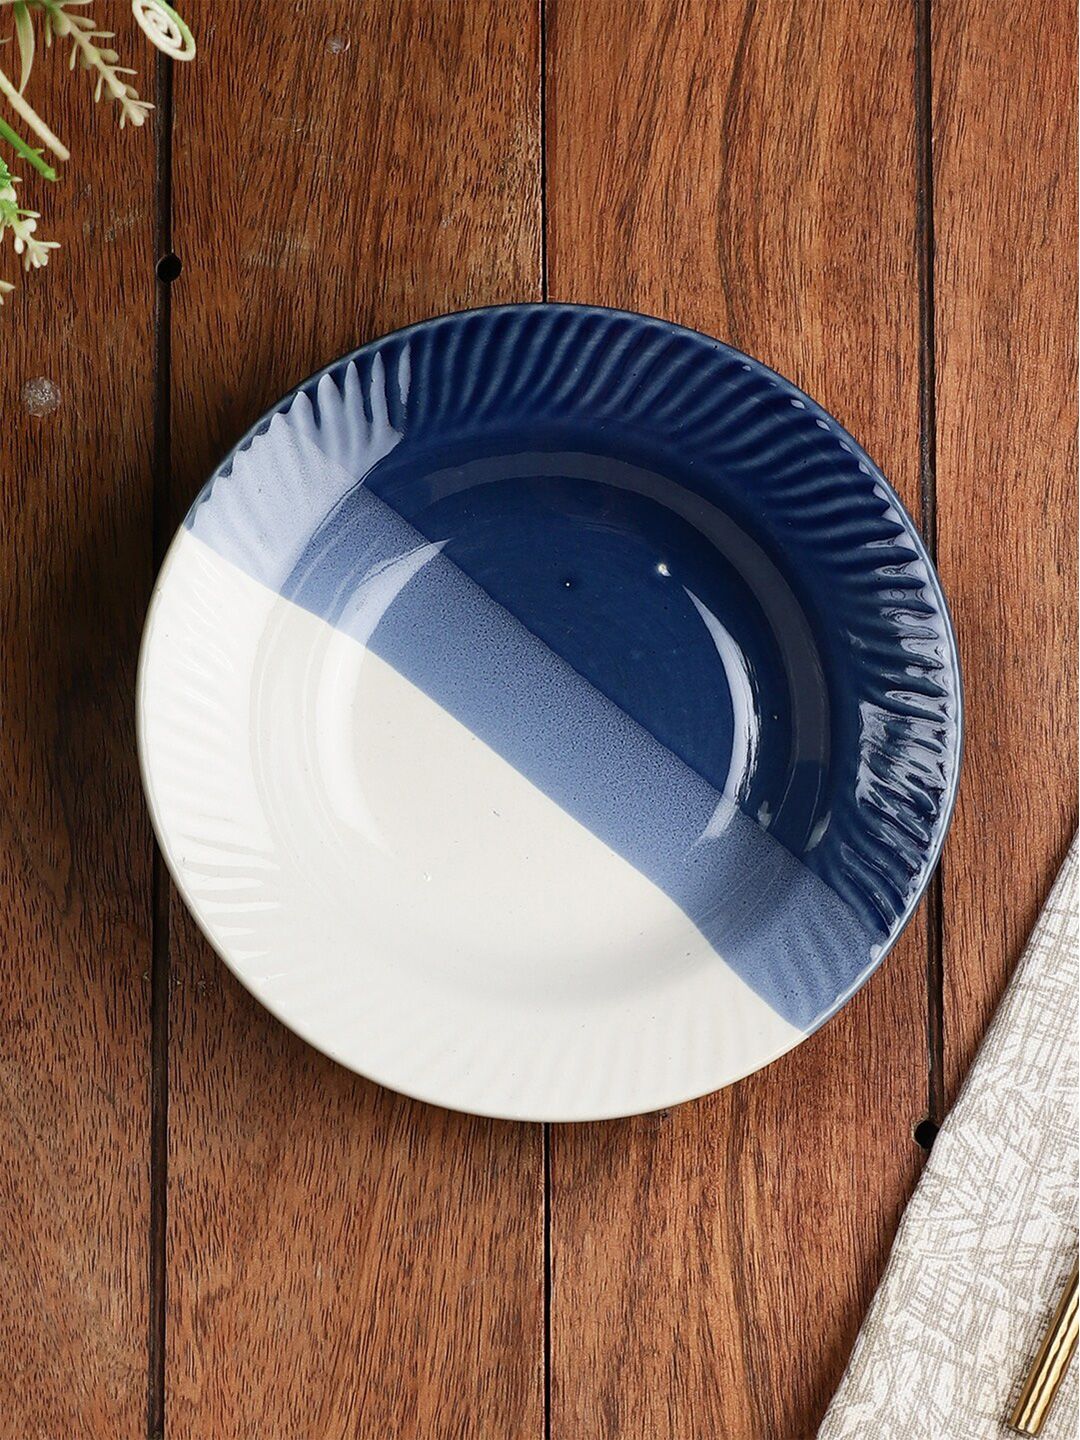 MIAH Decor Blue & White Printed Porcelain Glossy Bowl Price in India